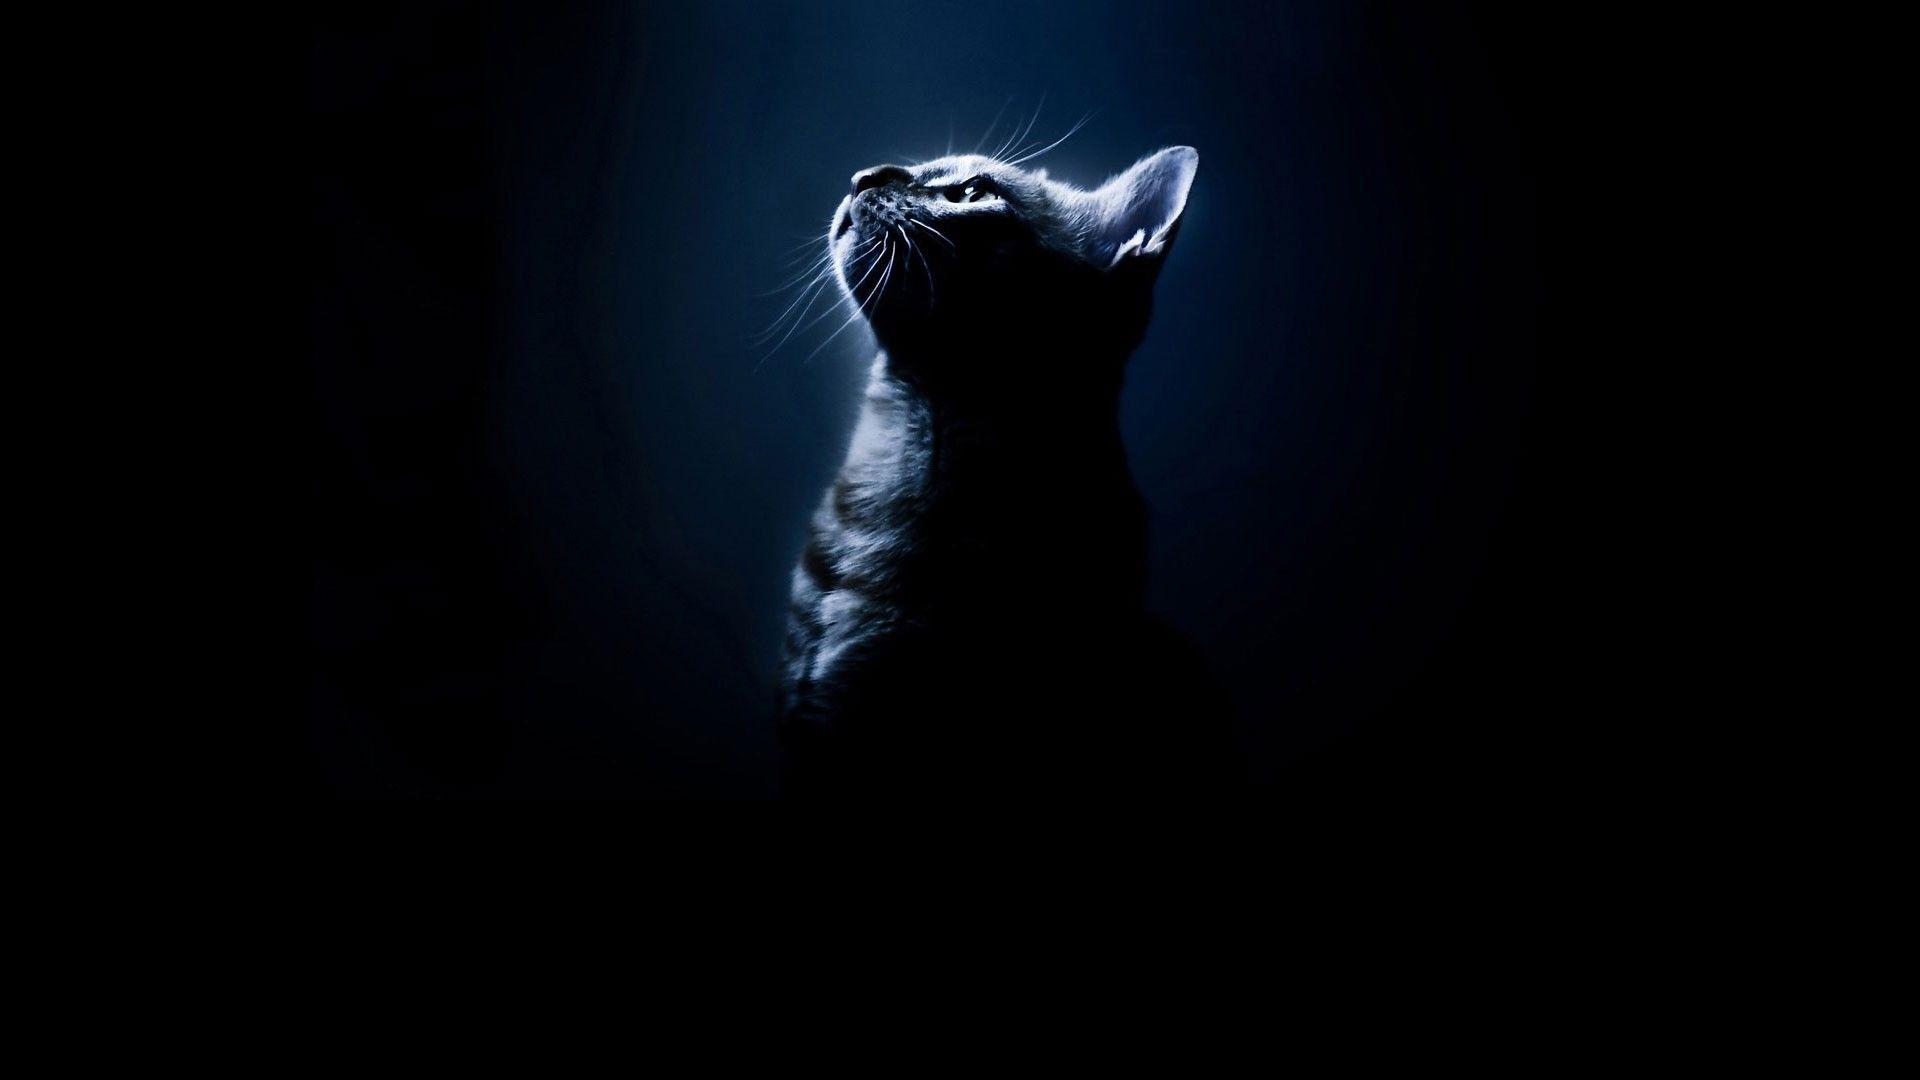 Cats Silhouettes Cats Black Animals Bengal Cat Photo Gallery for